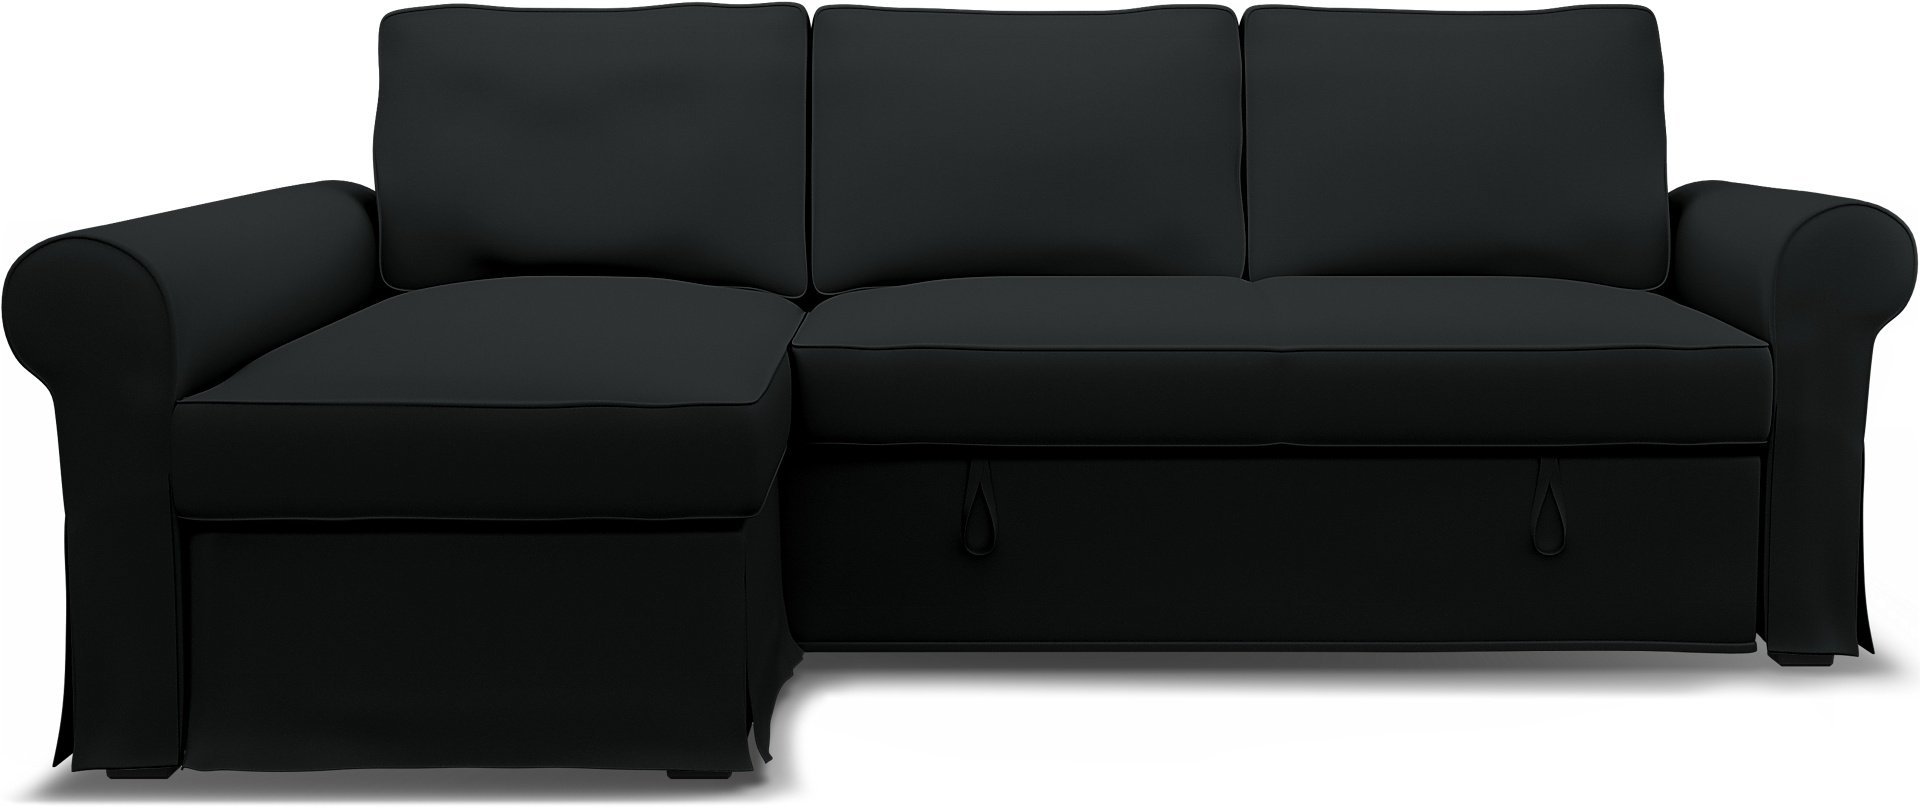 IKEA - Backabro Sofabed with Chaise Cover, Jet Black, Cotton - Bemz